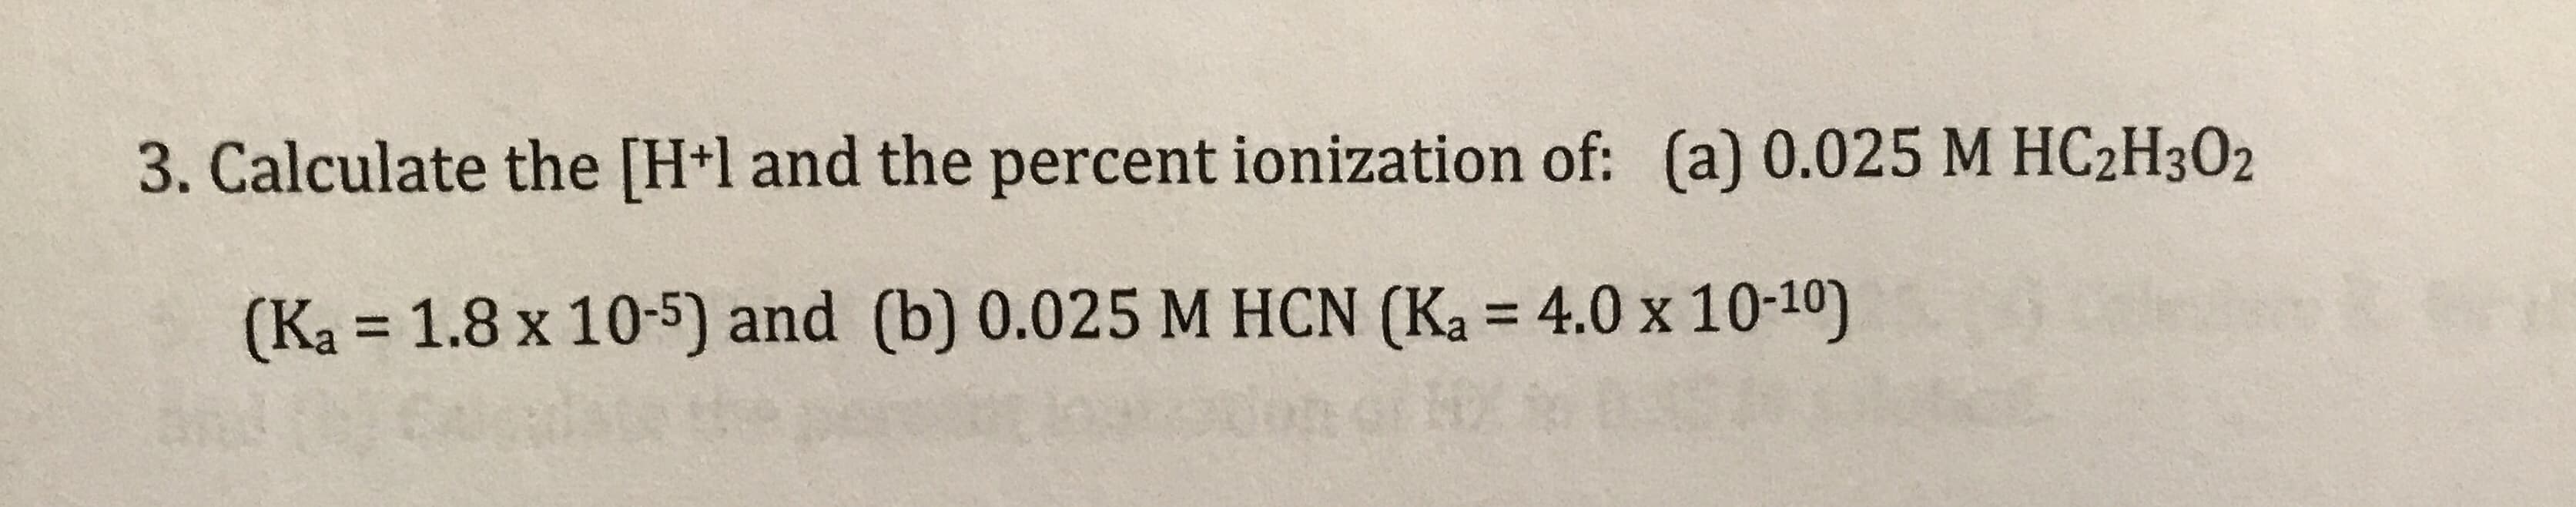 3. Calculate the [H+l and the percent ionization of: (a) 0.025 M HC2H3O2
(Ka = 1.8 x 10-5) and (b) 0.025 M HCN (Ka = 4.0 x 10-10)
%3D
%3D
